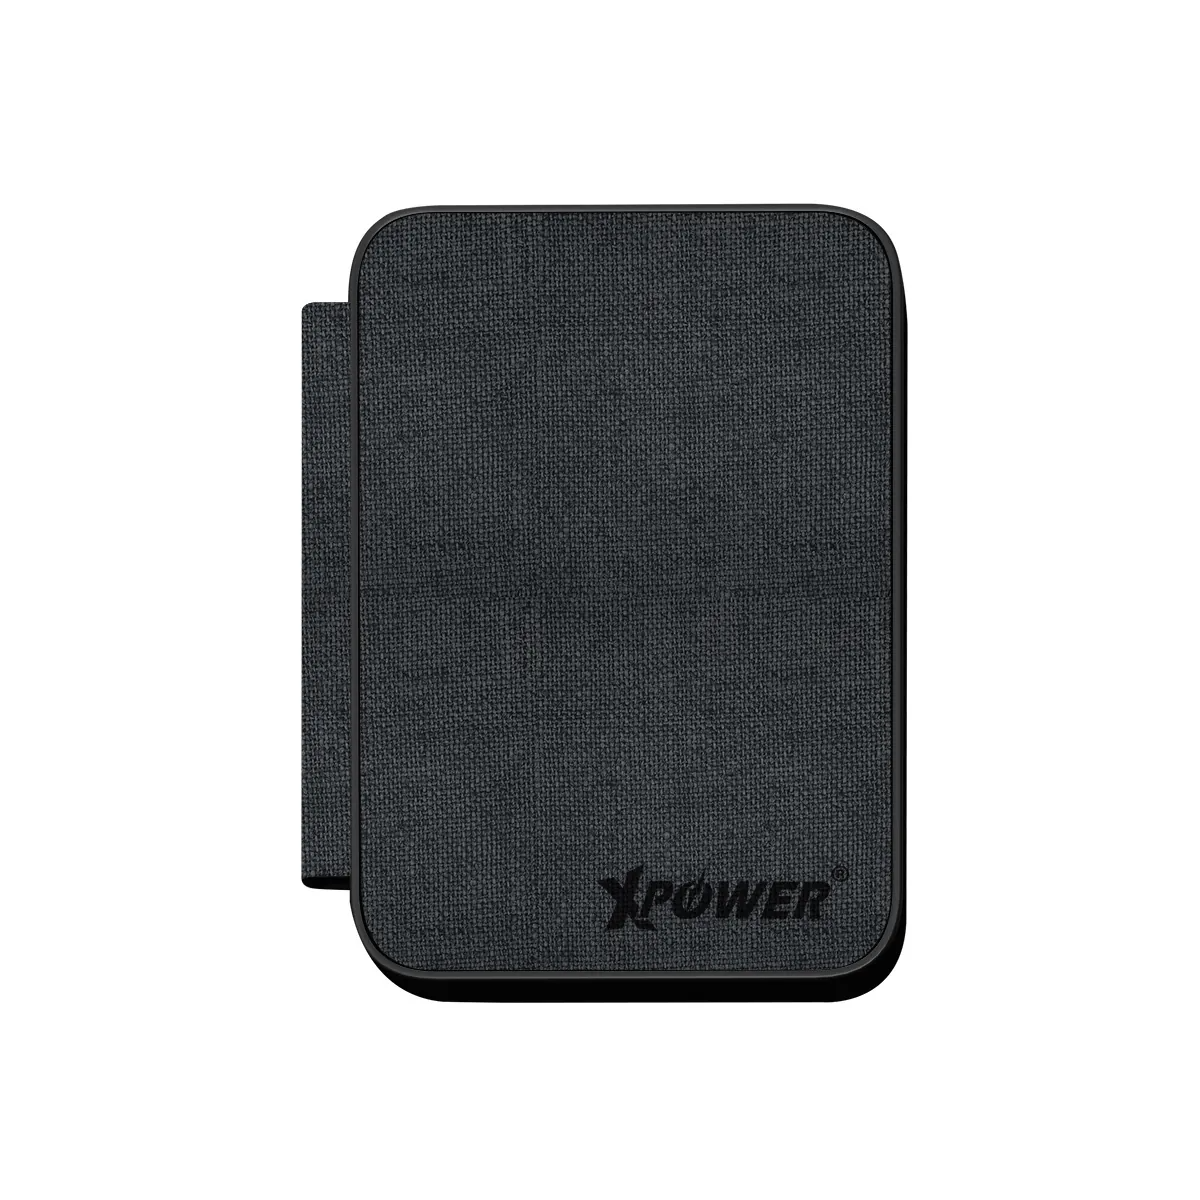 xPower 3 in 1 Charging Station